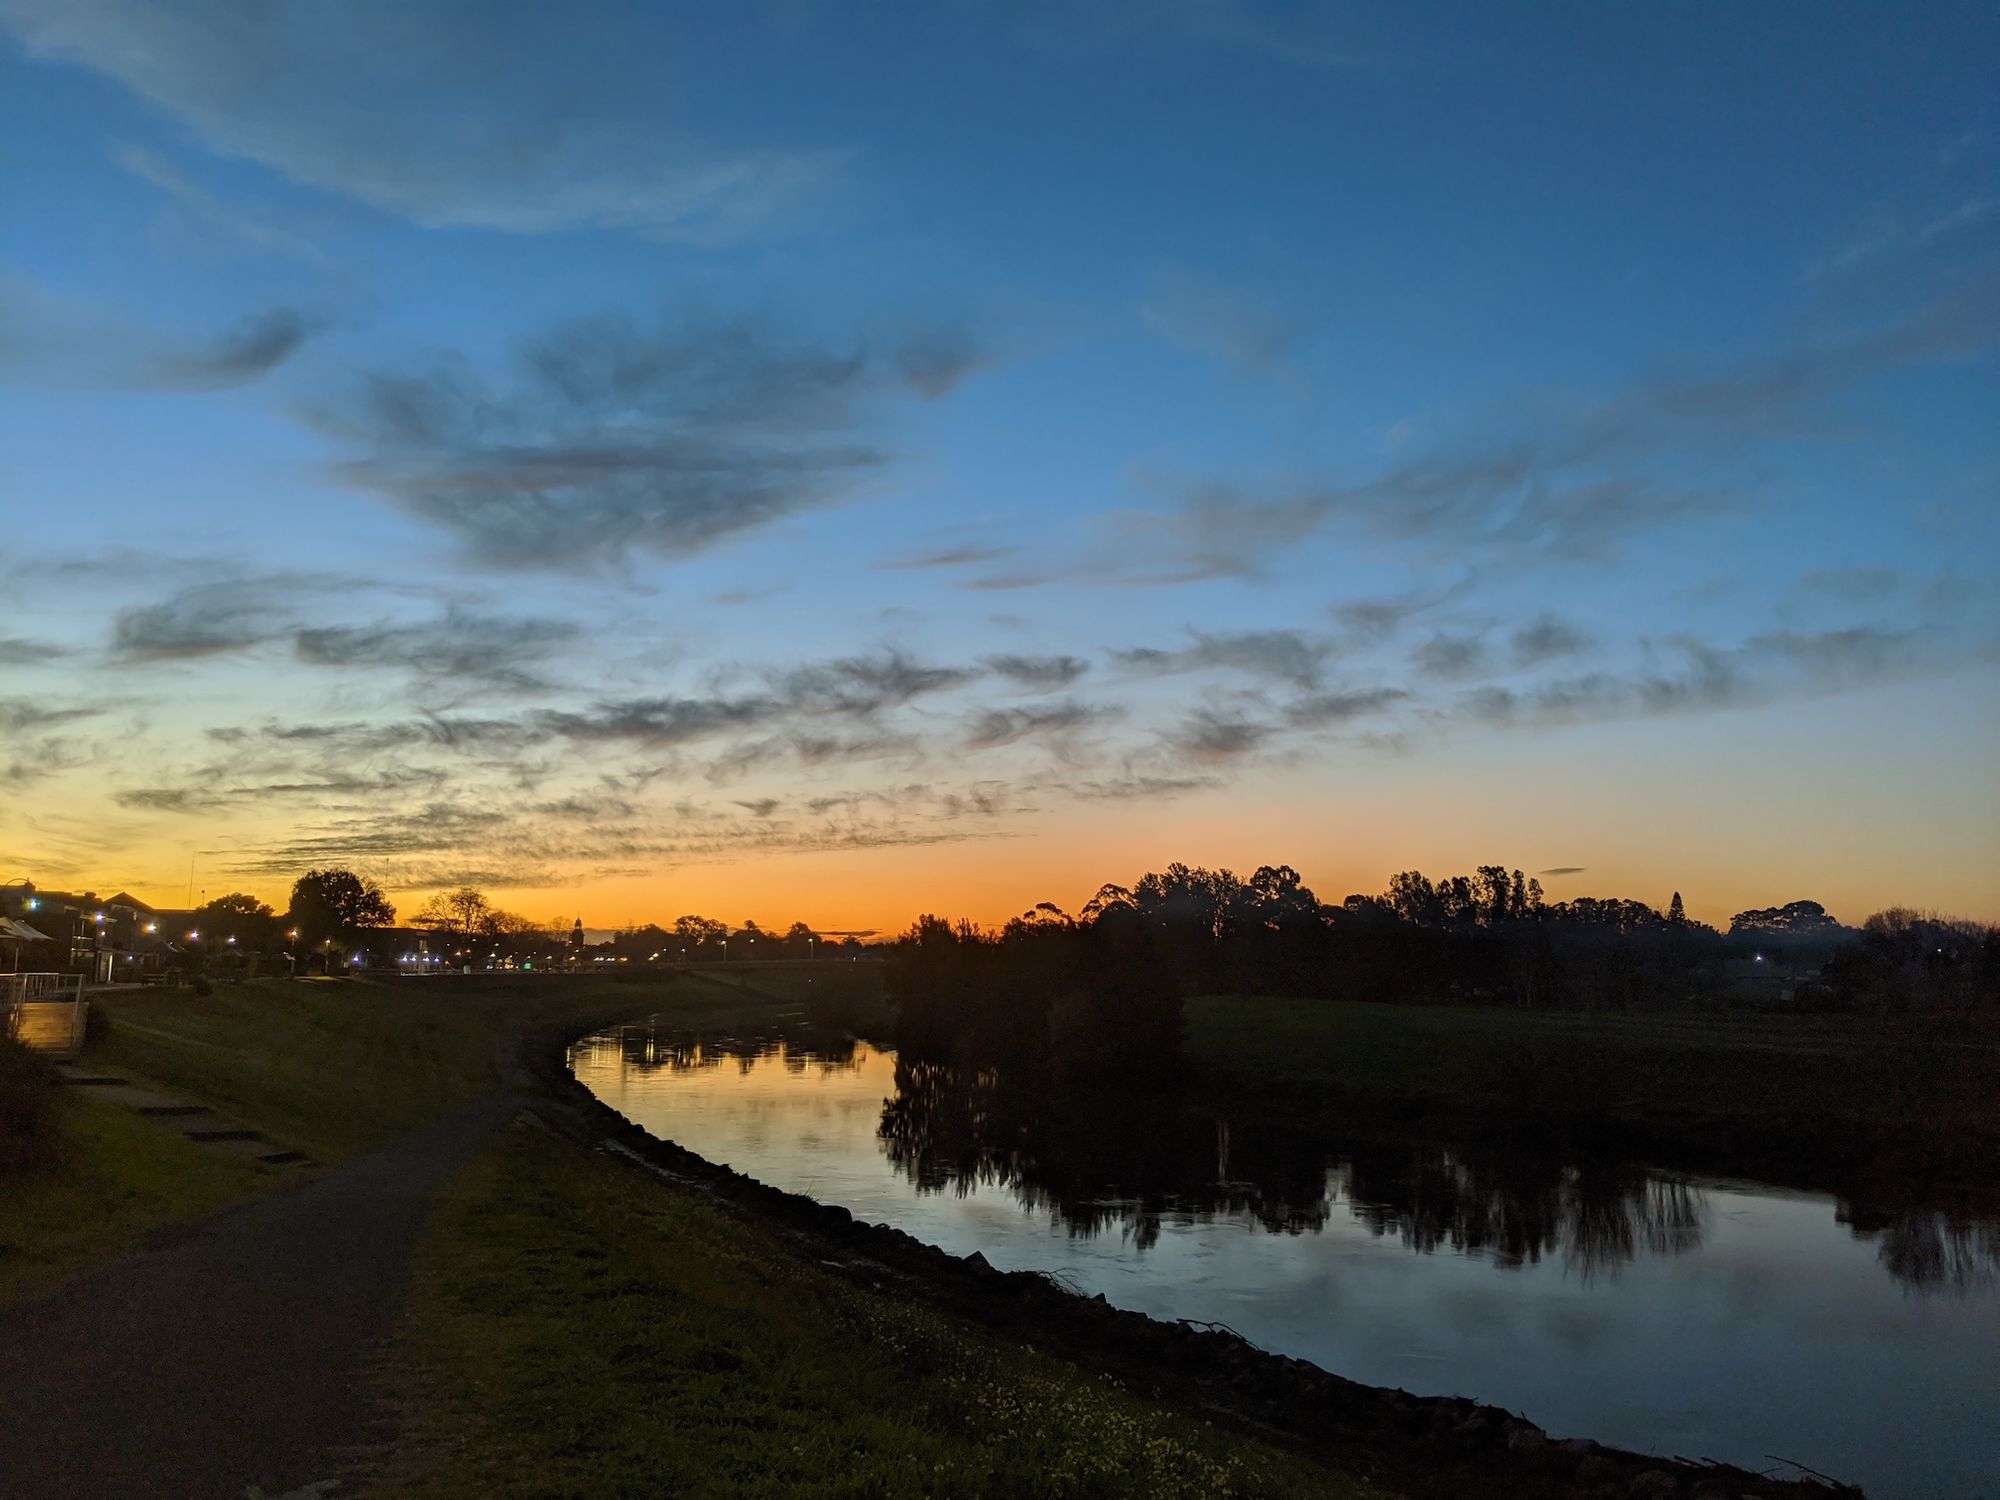 River foreground, sunset background, path on the left of the river.